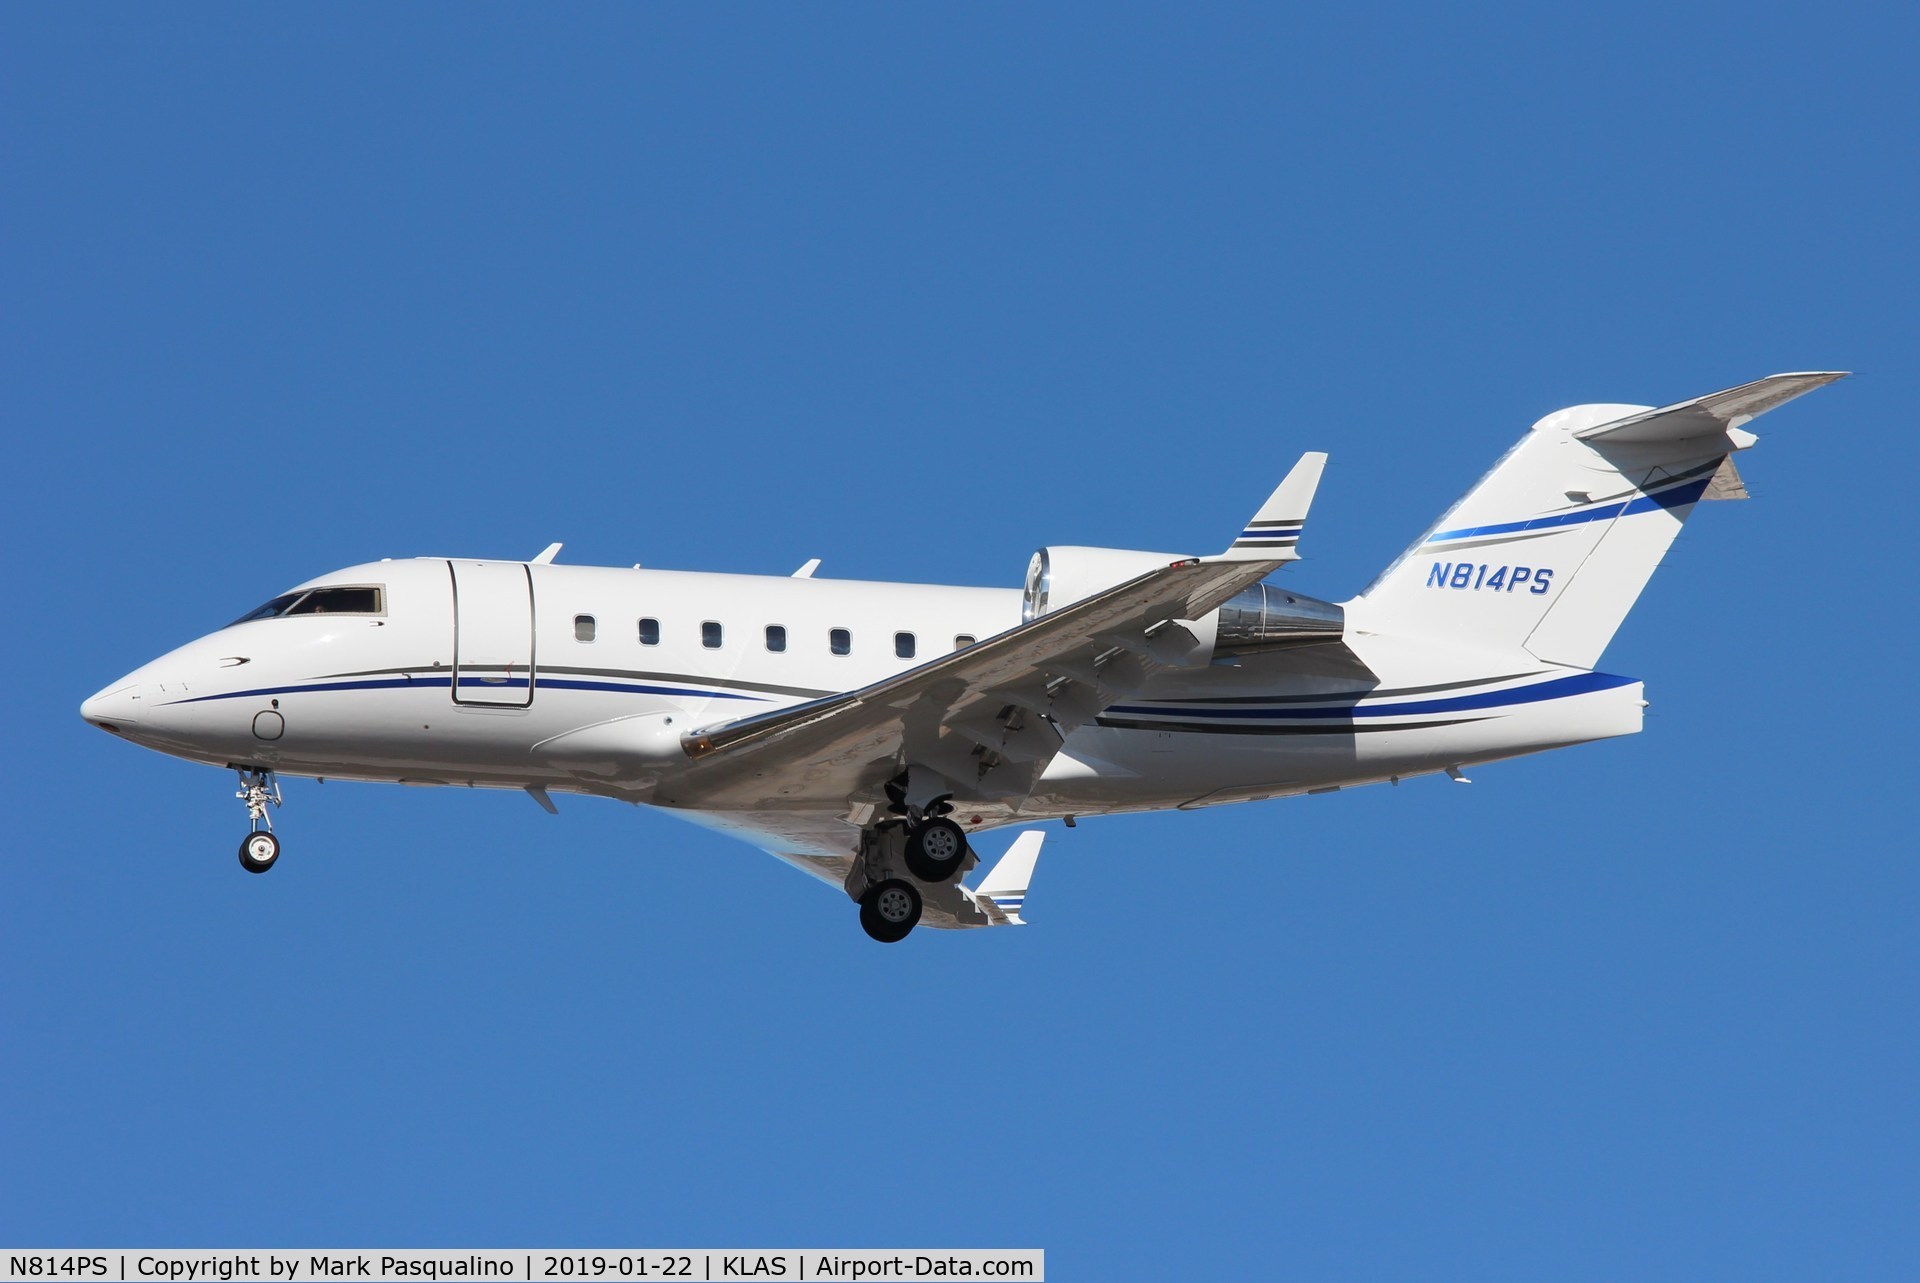 N814PS, 2002 Bombardier Challenger 604 (CL-600-2B16) C/N 5544, Challenger 604